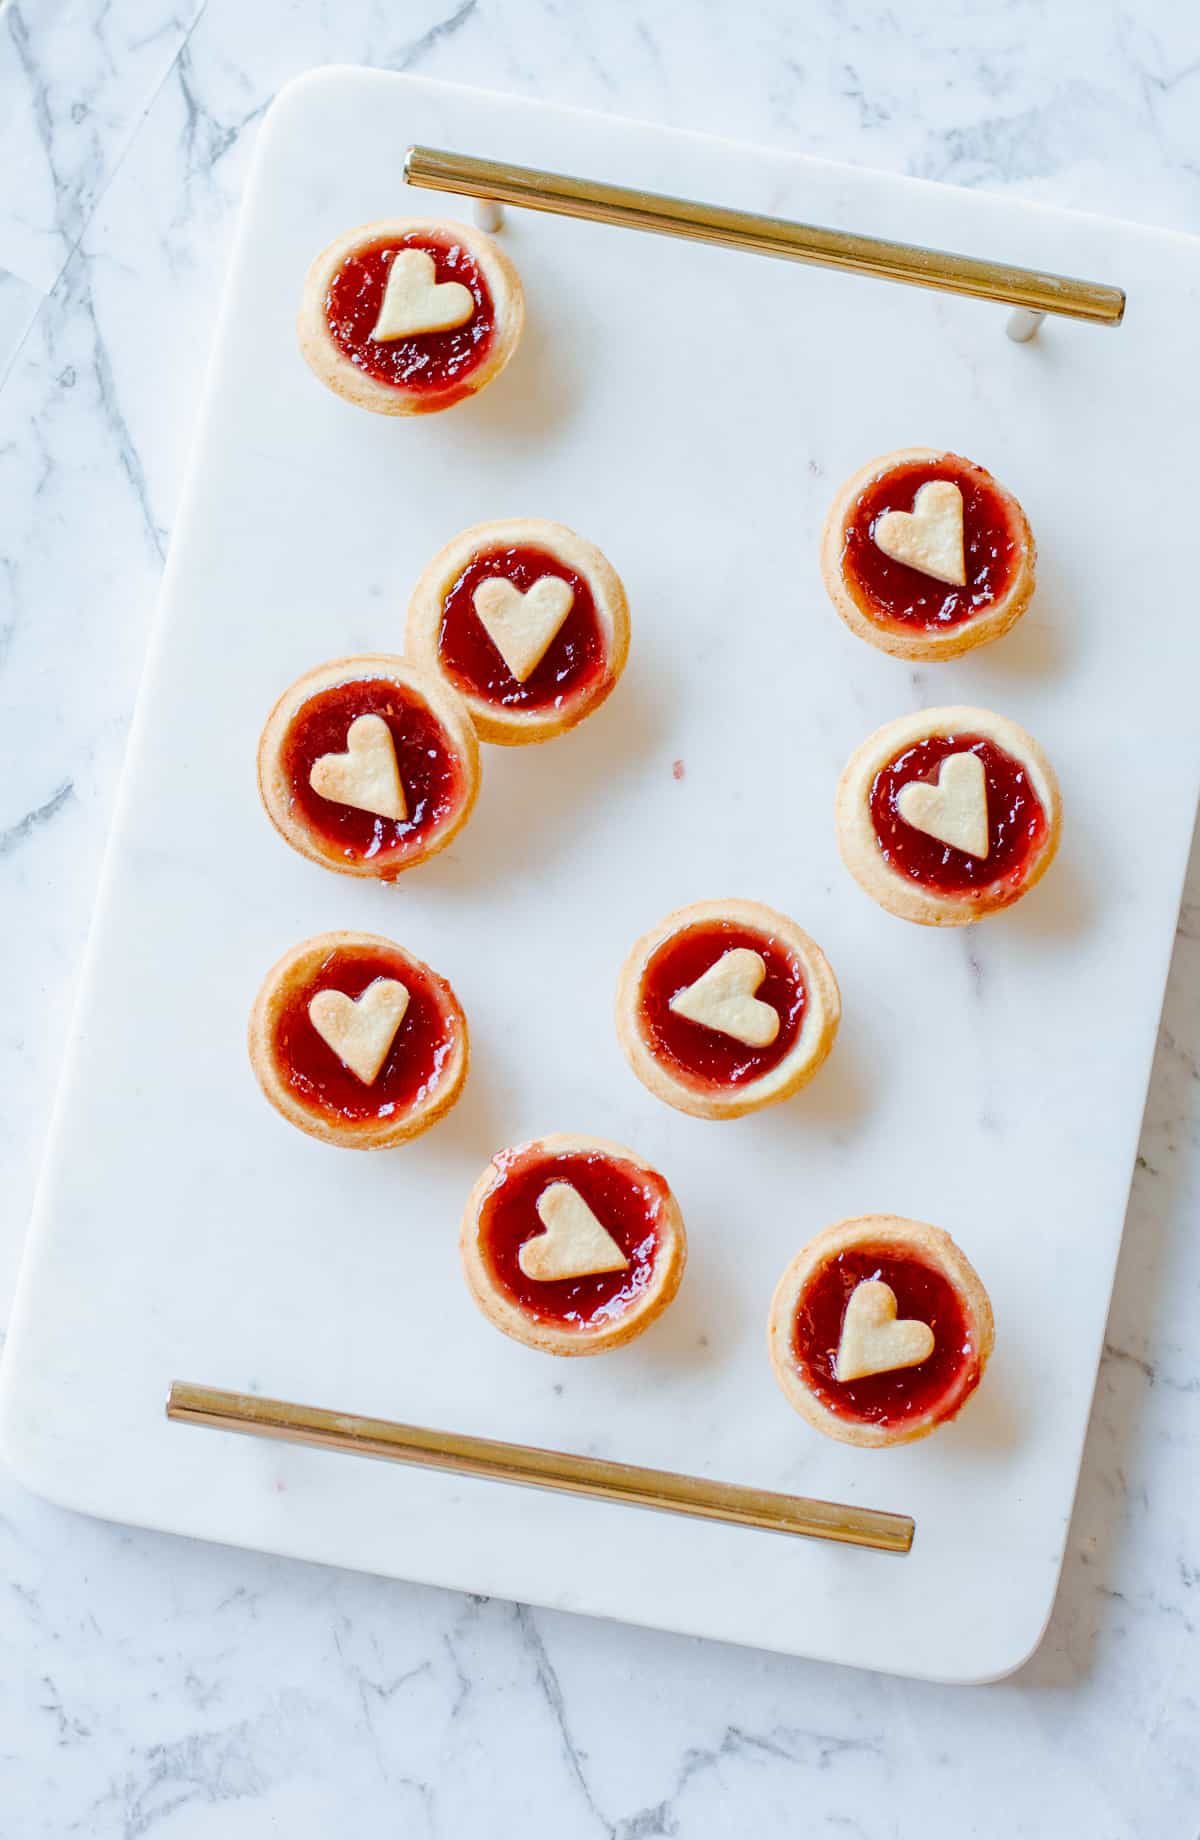 jam tarts with hearts on top